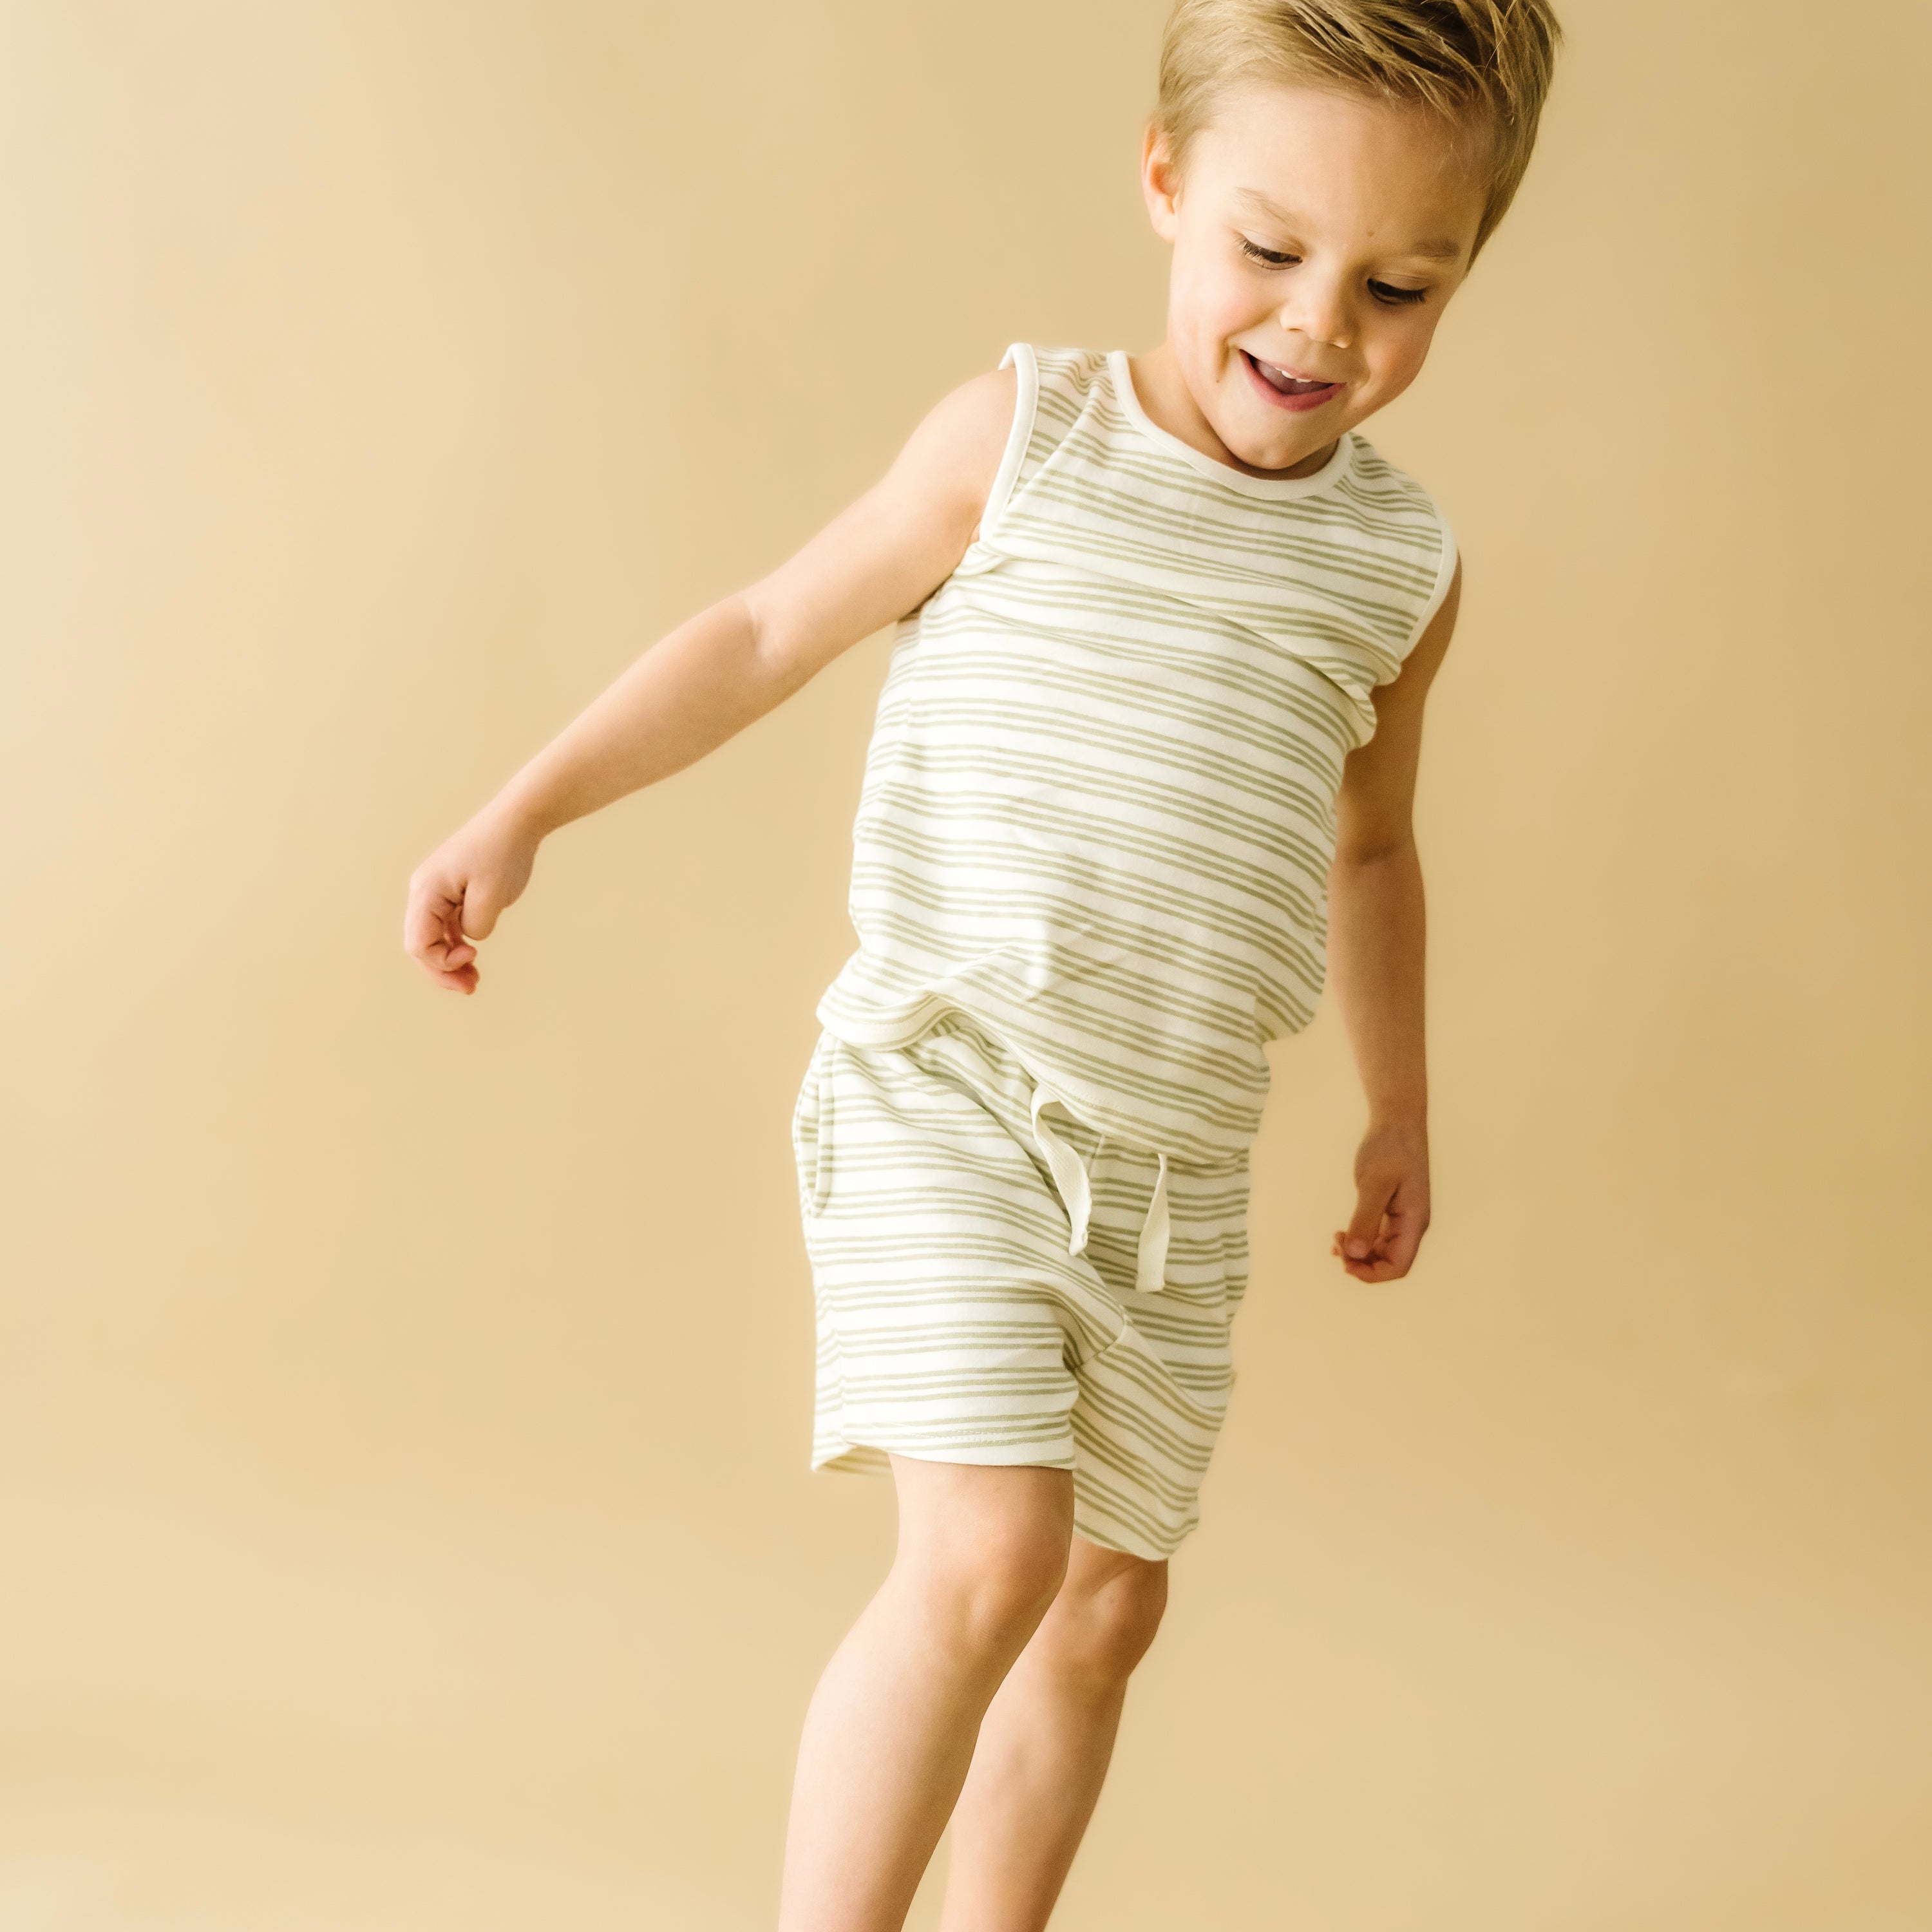 A young boy in Organic Kids Foam Stripes organic tee and shorts is playfully jumping, with a joyful expression, against a soft beige background.